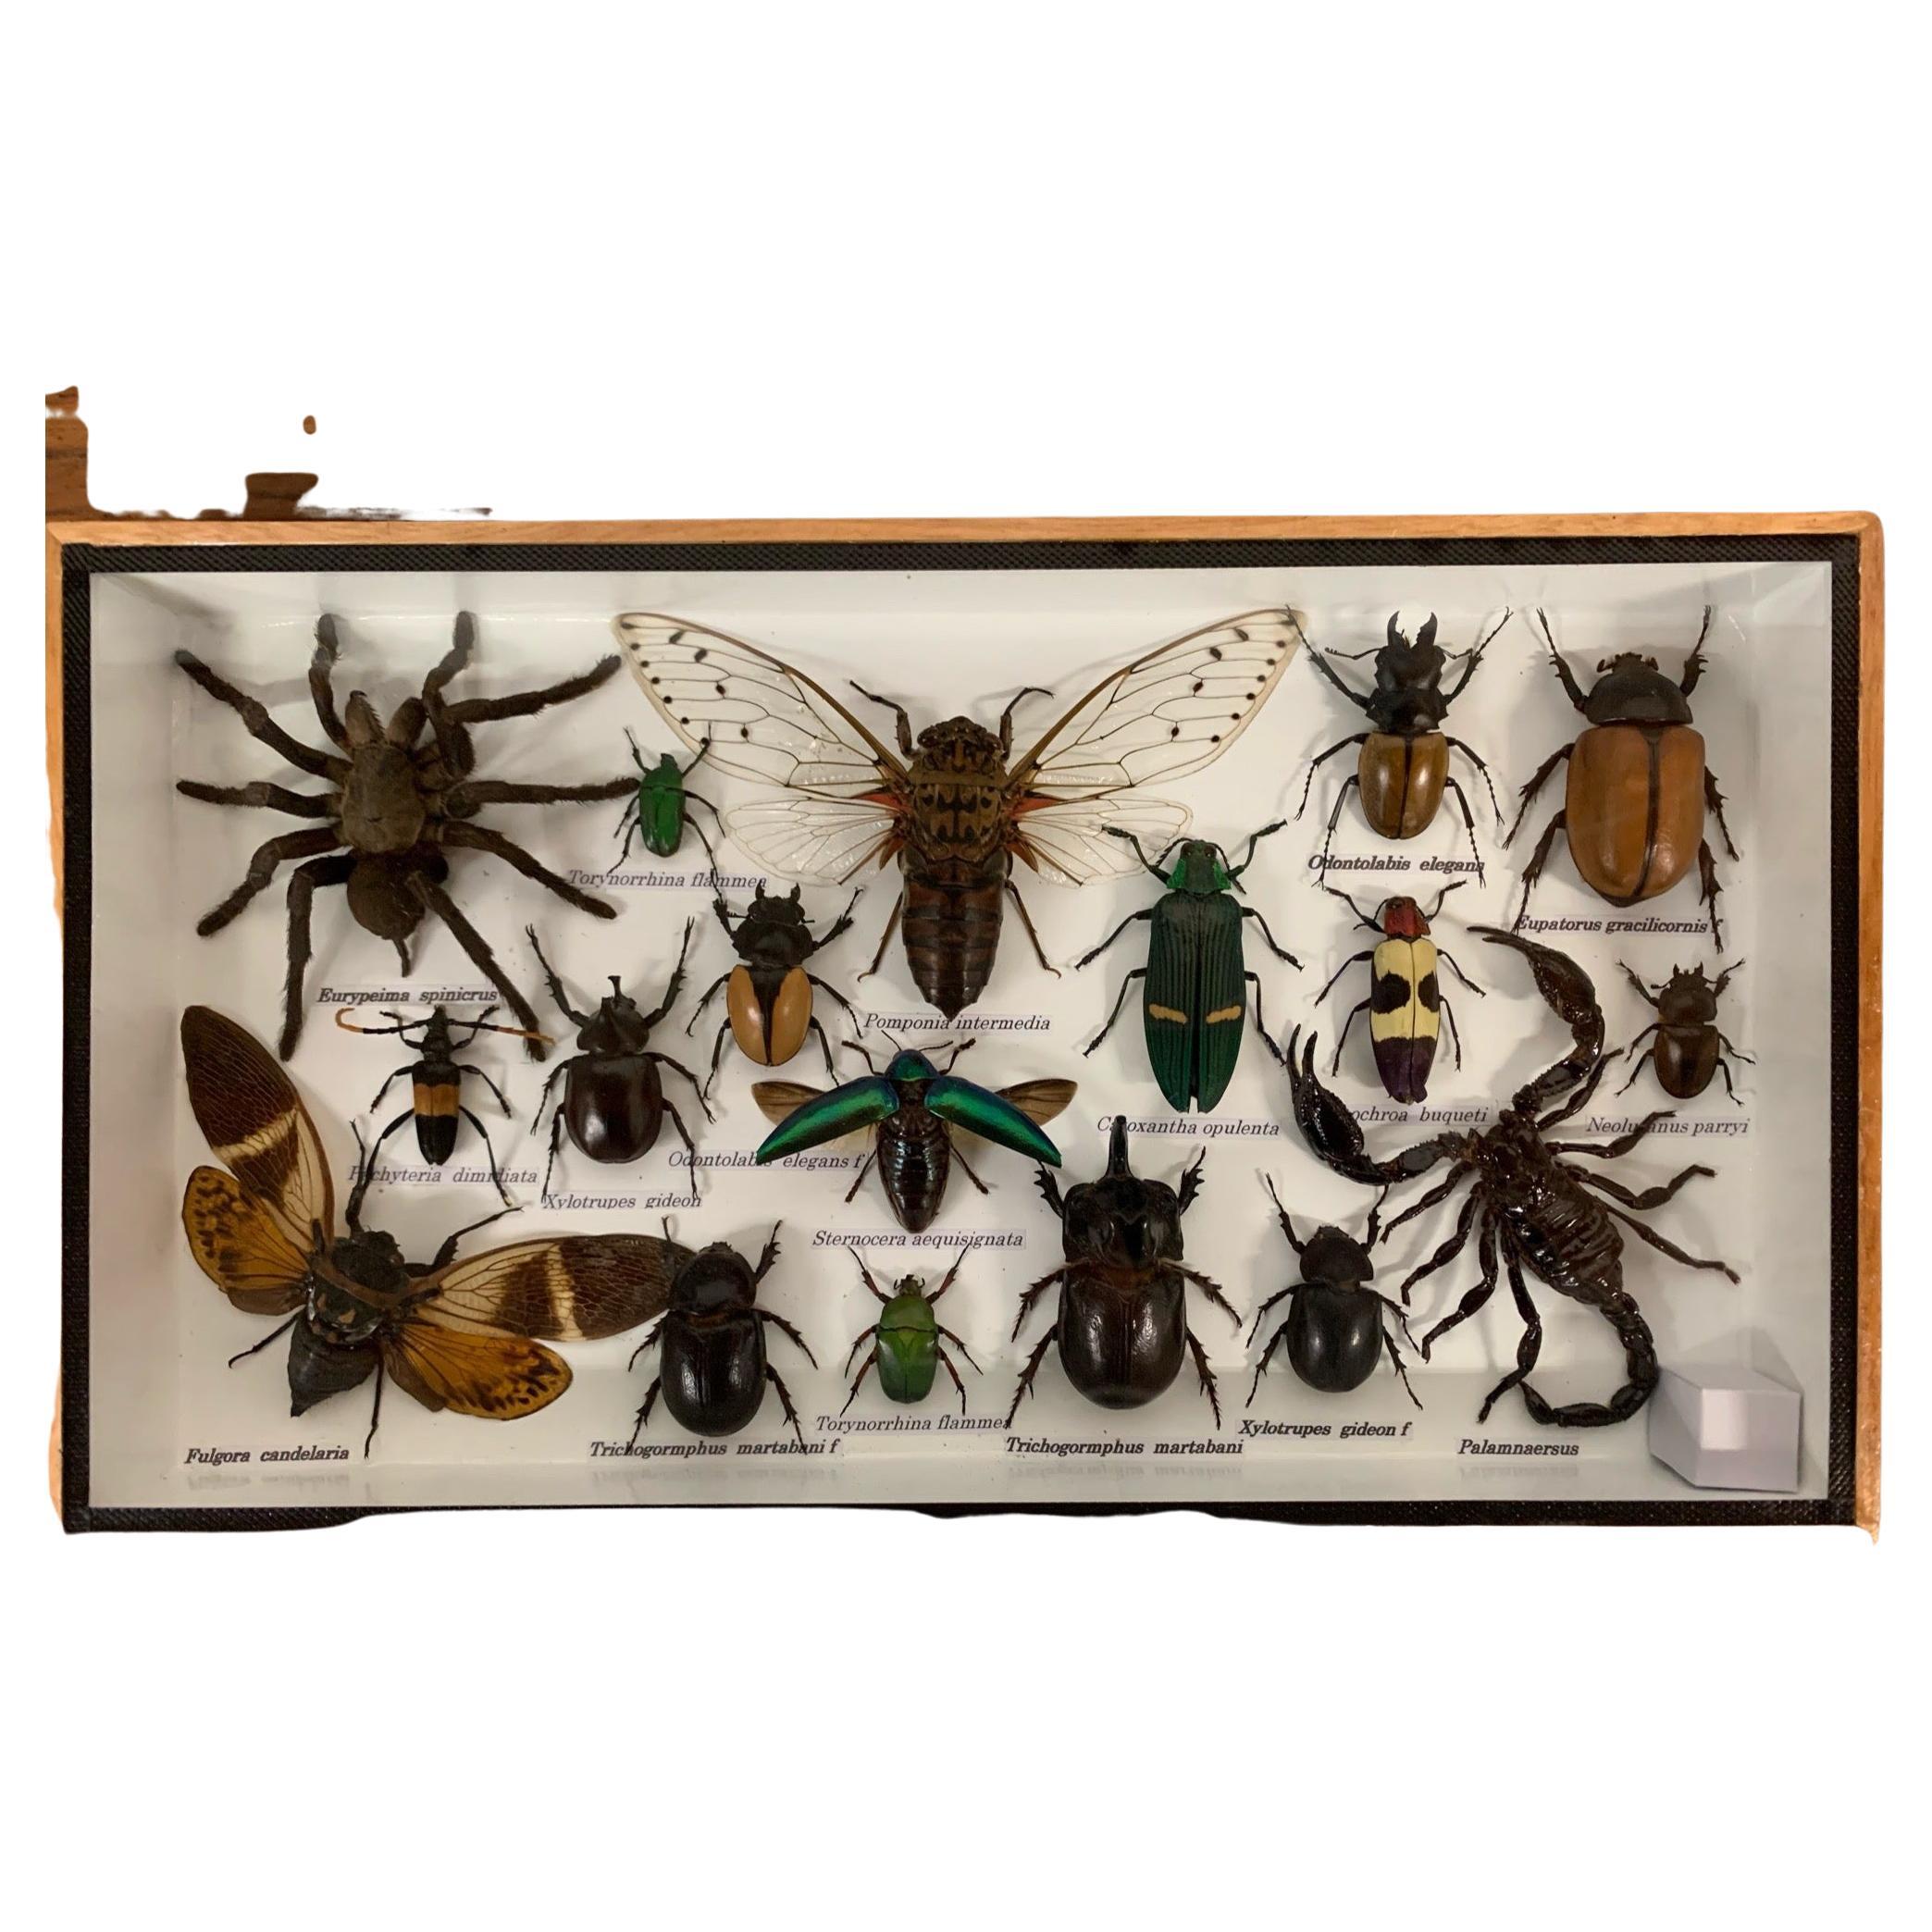 POPETPOP Bug Display Box Insect Display Case Wooden Specimen Box with Glass Window and Secure Specimen Display Box 